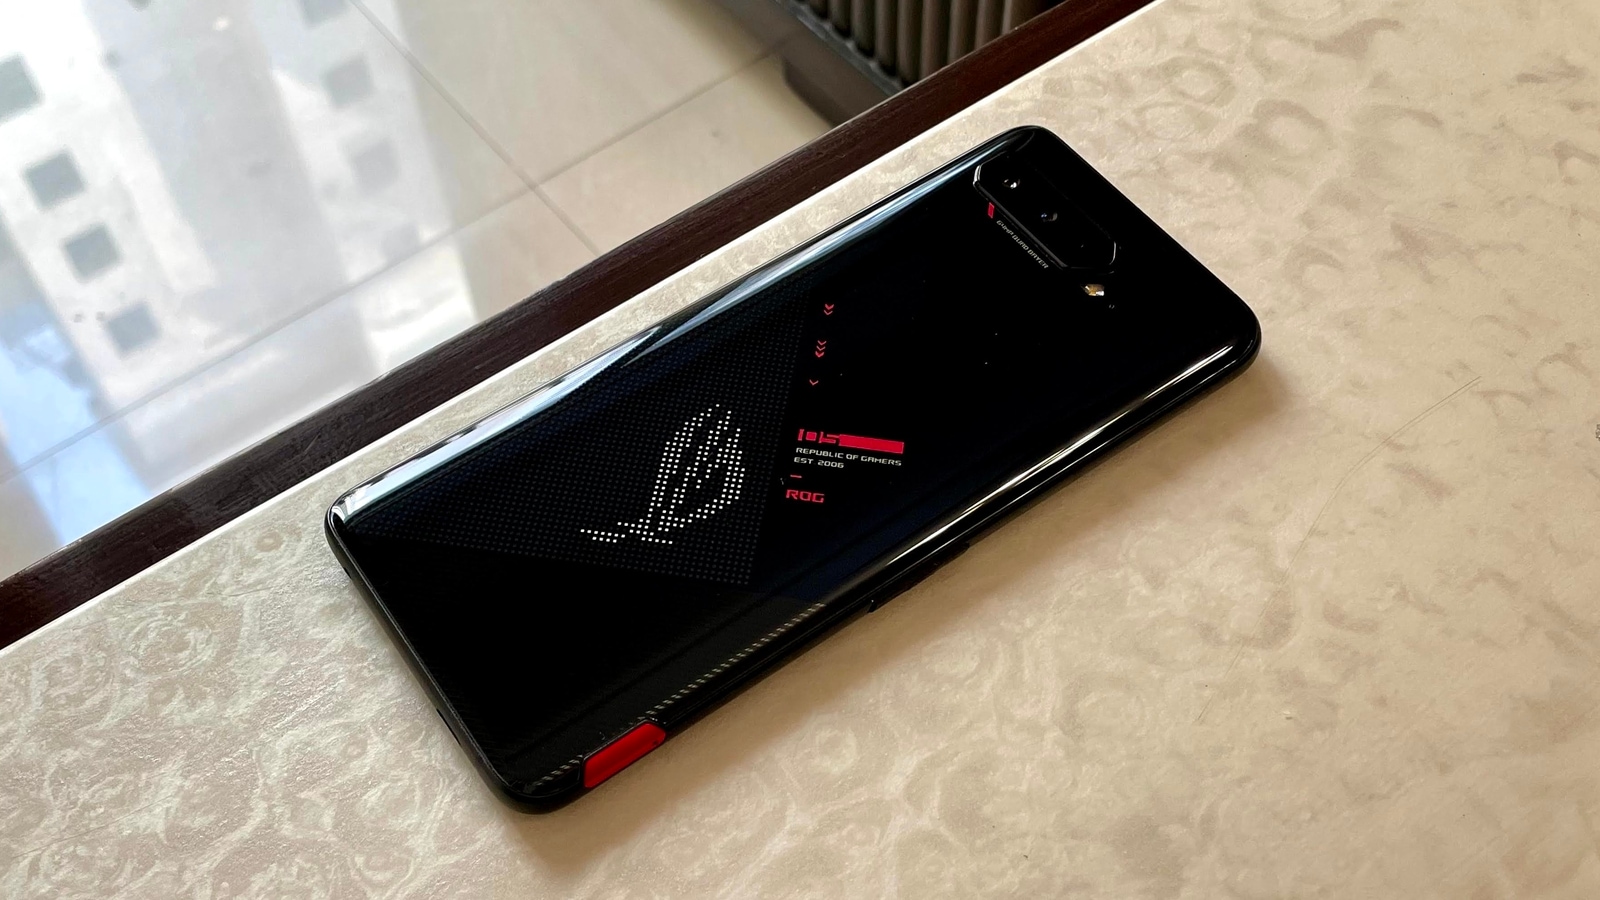 Asus ROG Mobile phone 6 could beat gaming laptops with this feature! Check out this leak